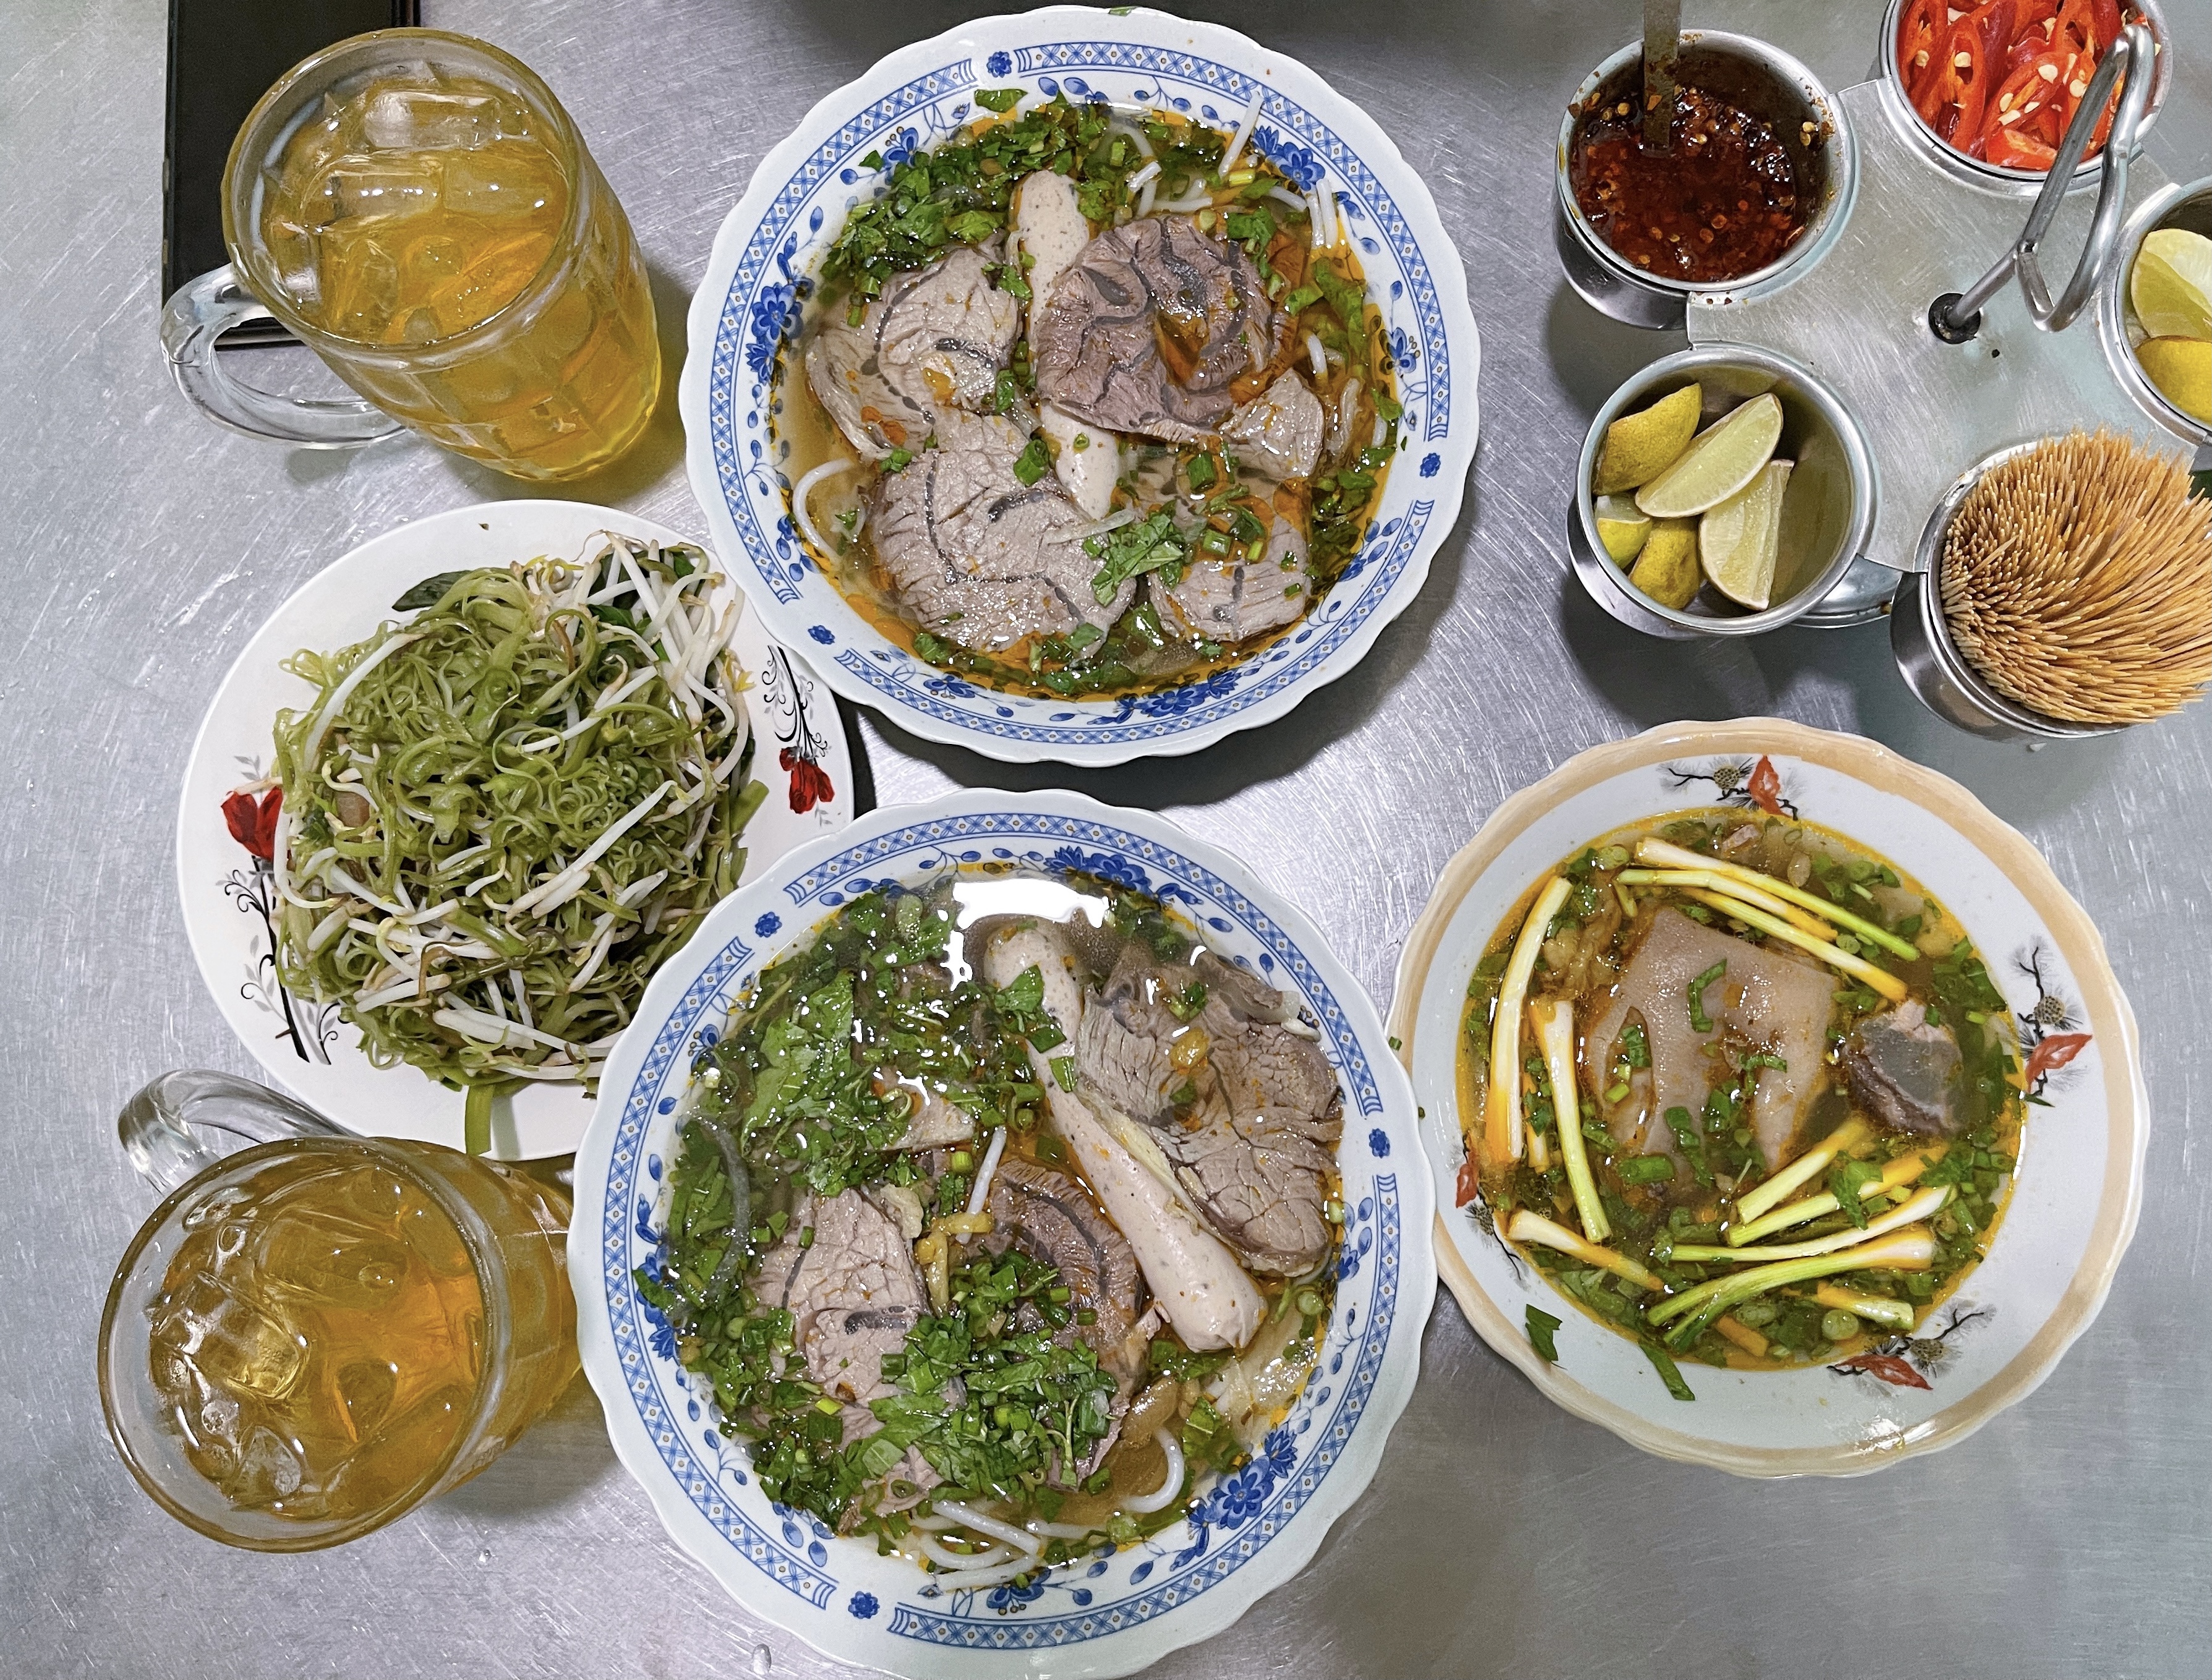 Bowls of bún bò Huế (Hue spicy beef noodle soup) are served at a quán in District 10, Ho Chi Minh City. Photo: Dong Nguyen / Tuoi Tre News